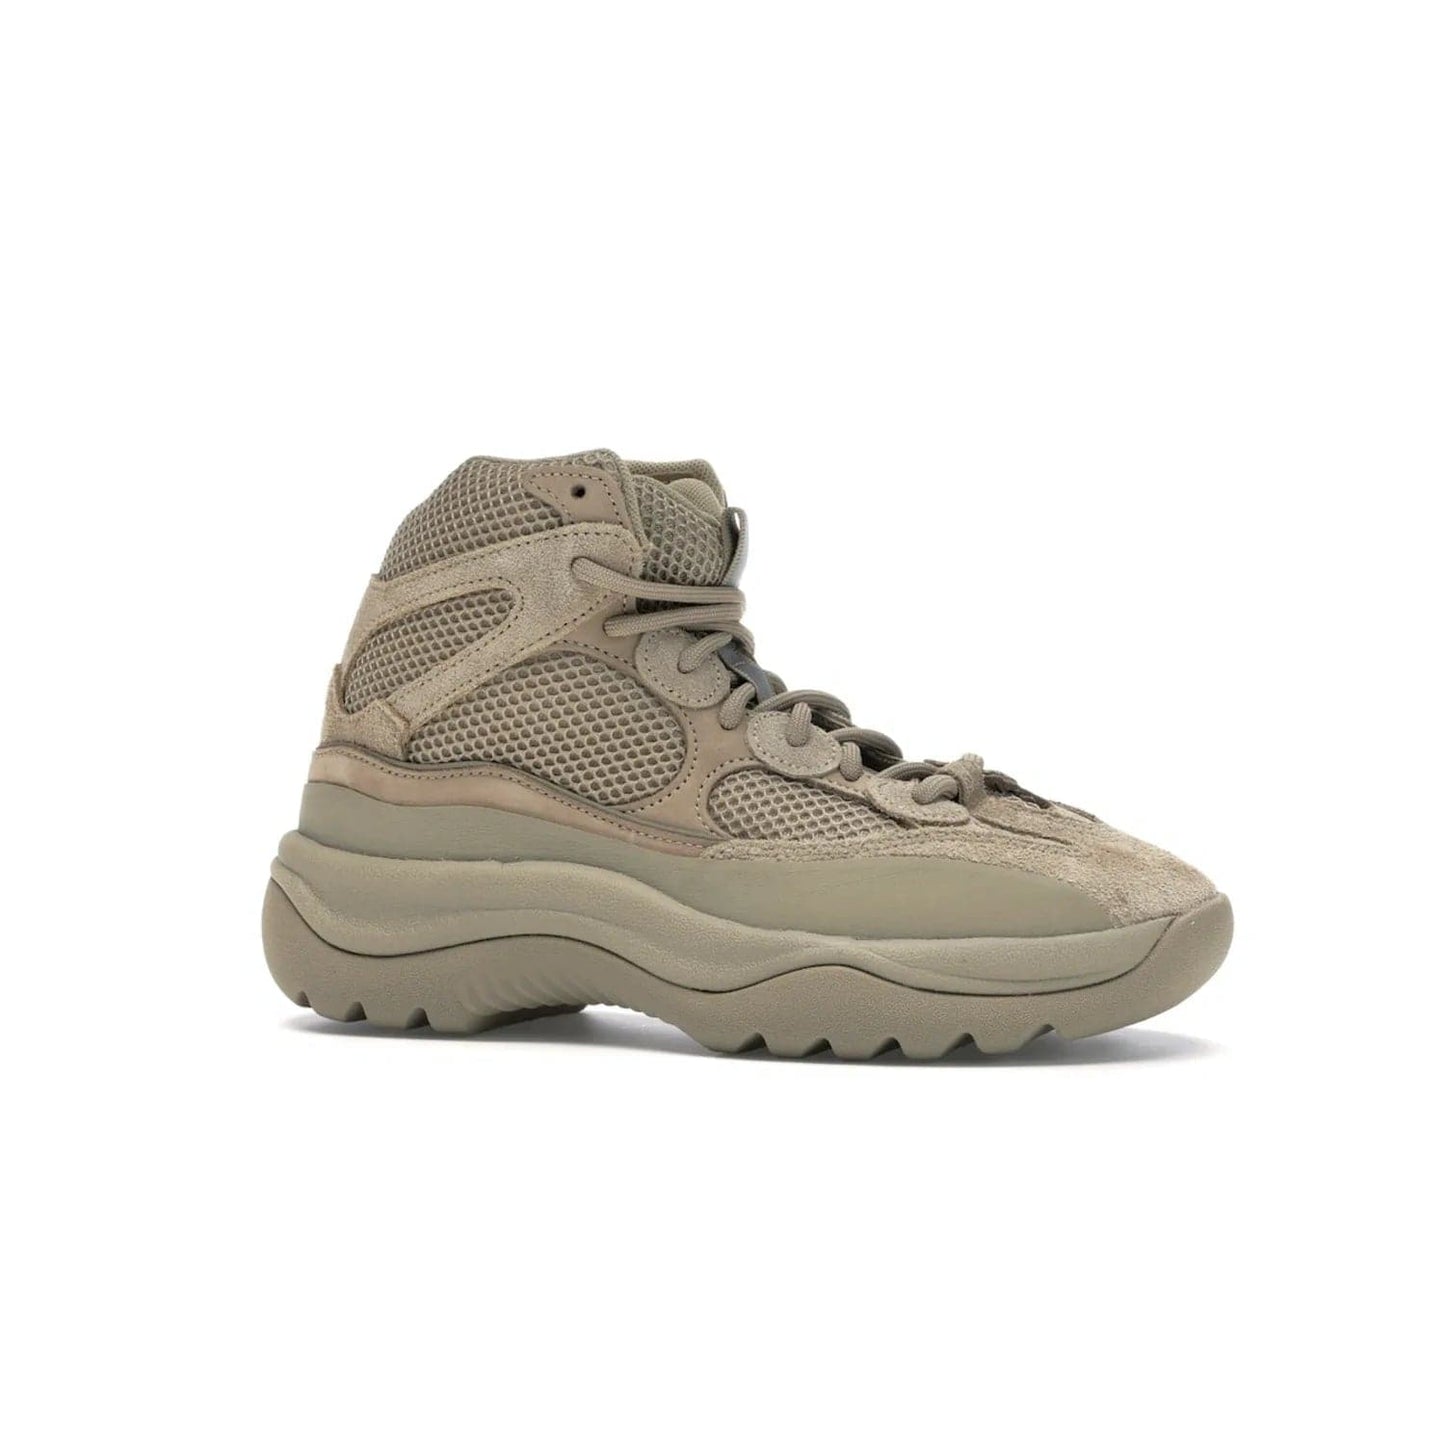 adidas Yeezy Desert Boot Rock - Image 3 - Only at www.BallersClubKickz.com - #
This season, make a fashion statement with the adidas Yeezy Desert Boot Rock. Nubuck and suede upper offers tonal style while the grooved sole provides traction and stability. Get yours in April 2019.